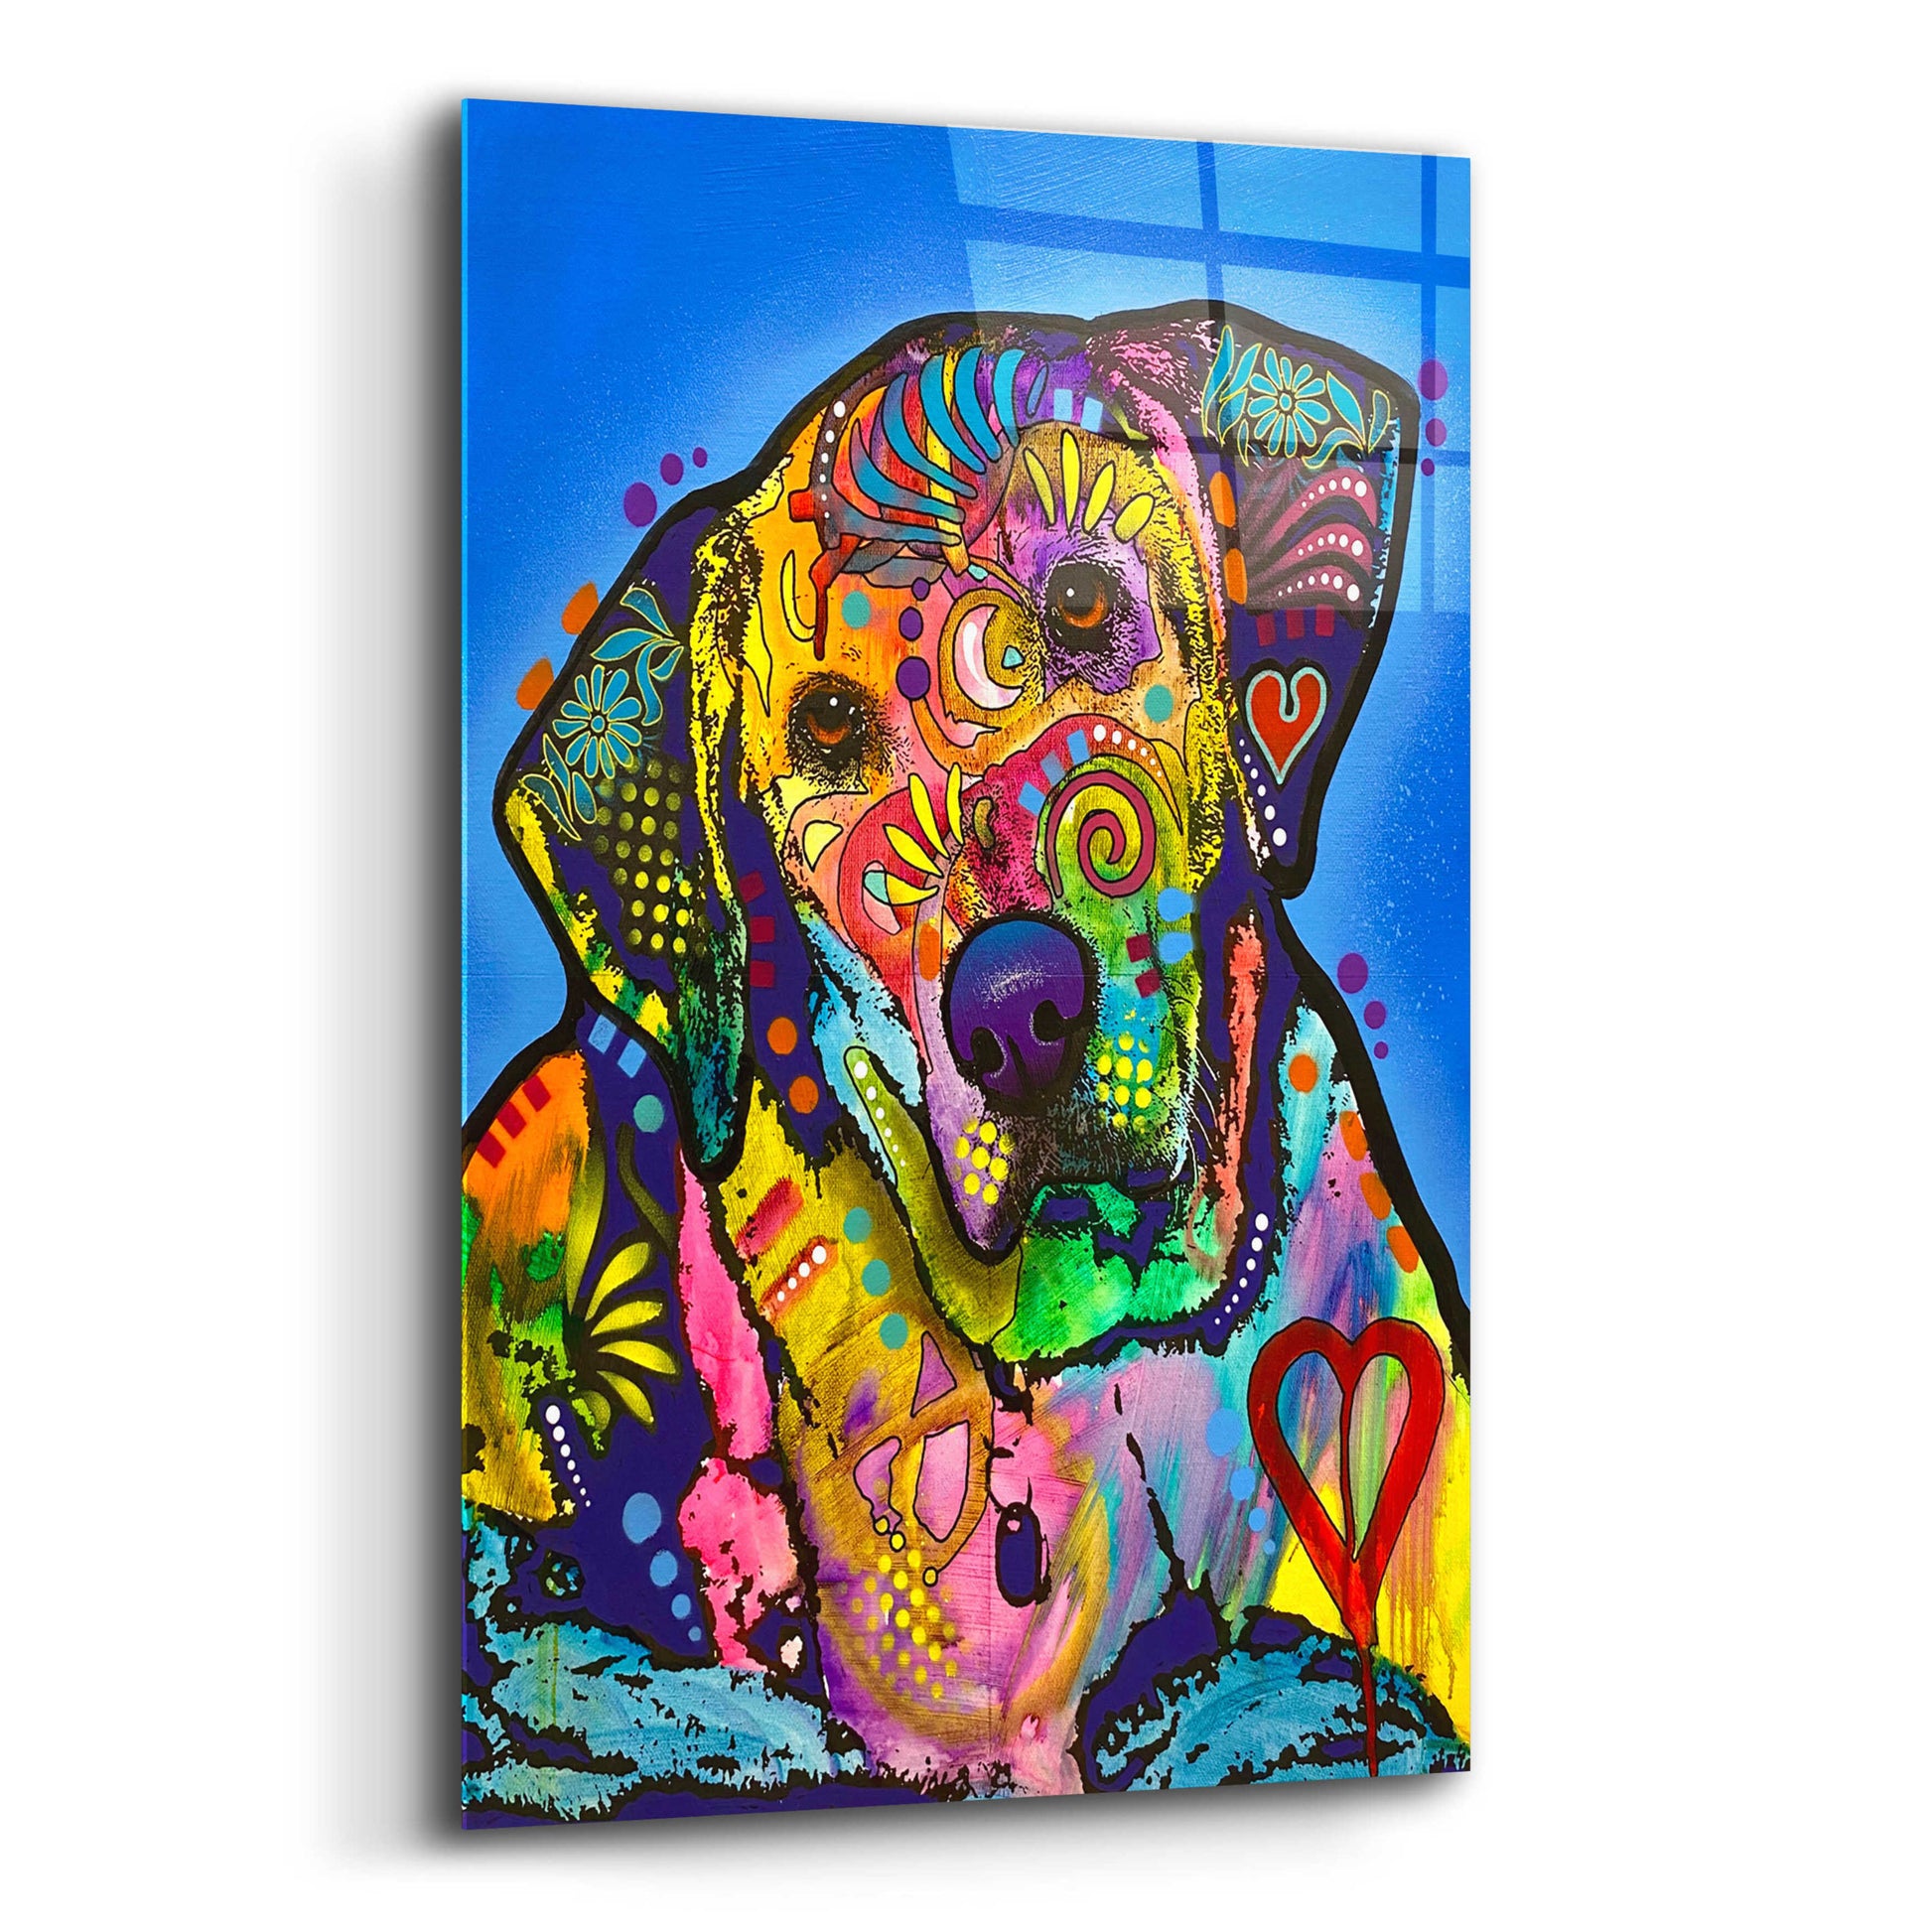 Epic Art 'Got Any Snacks' by Dean Russo, Acrylic Glass Wall Art,,12x16